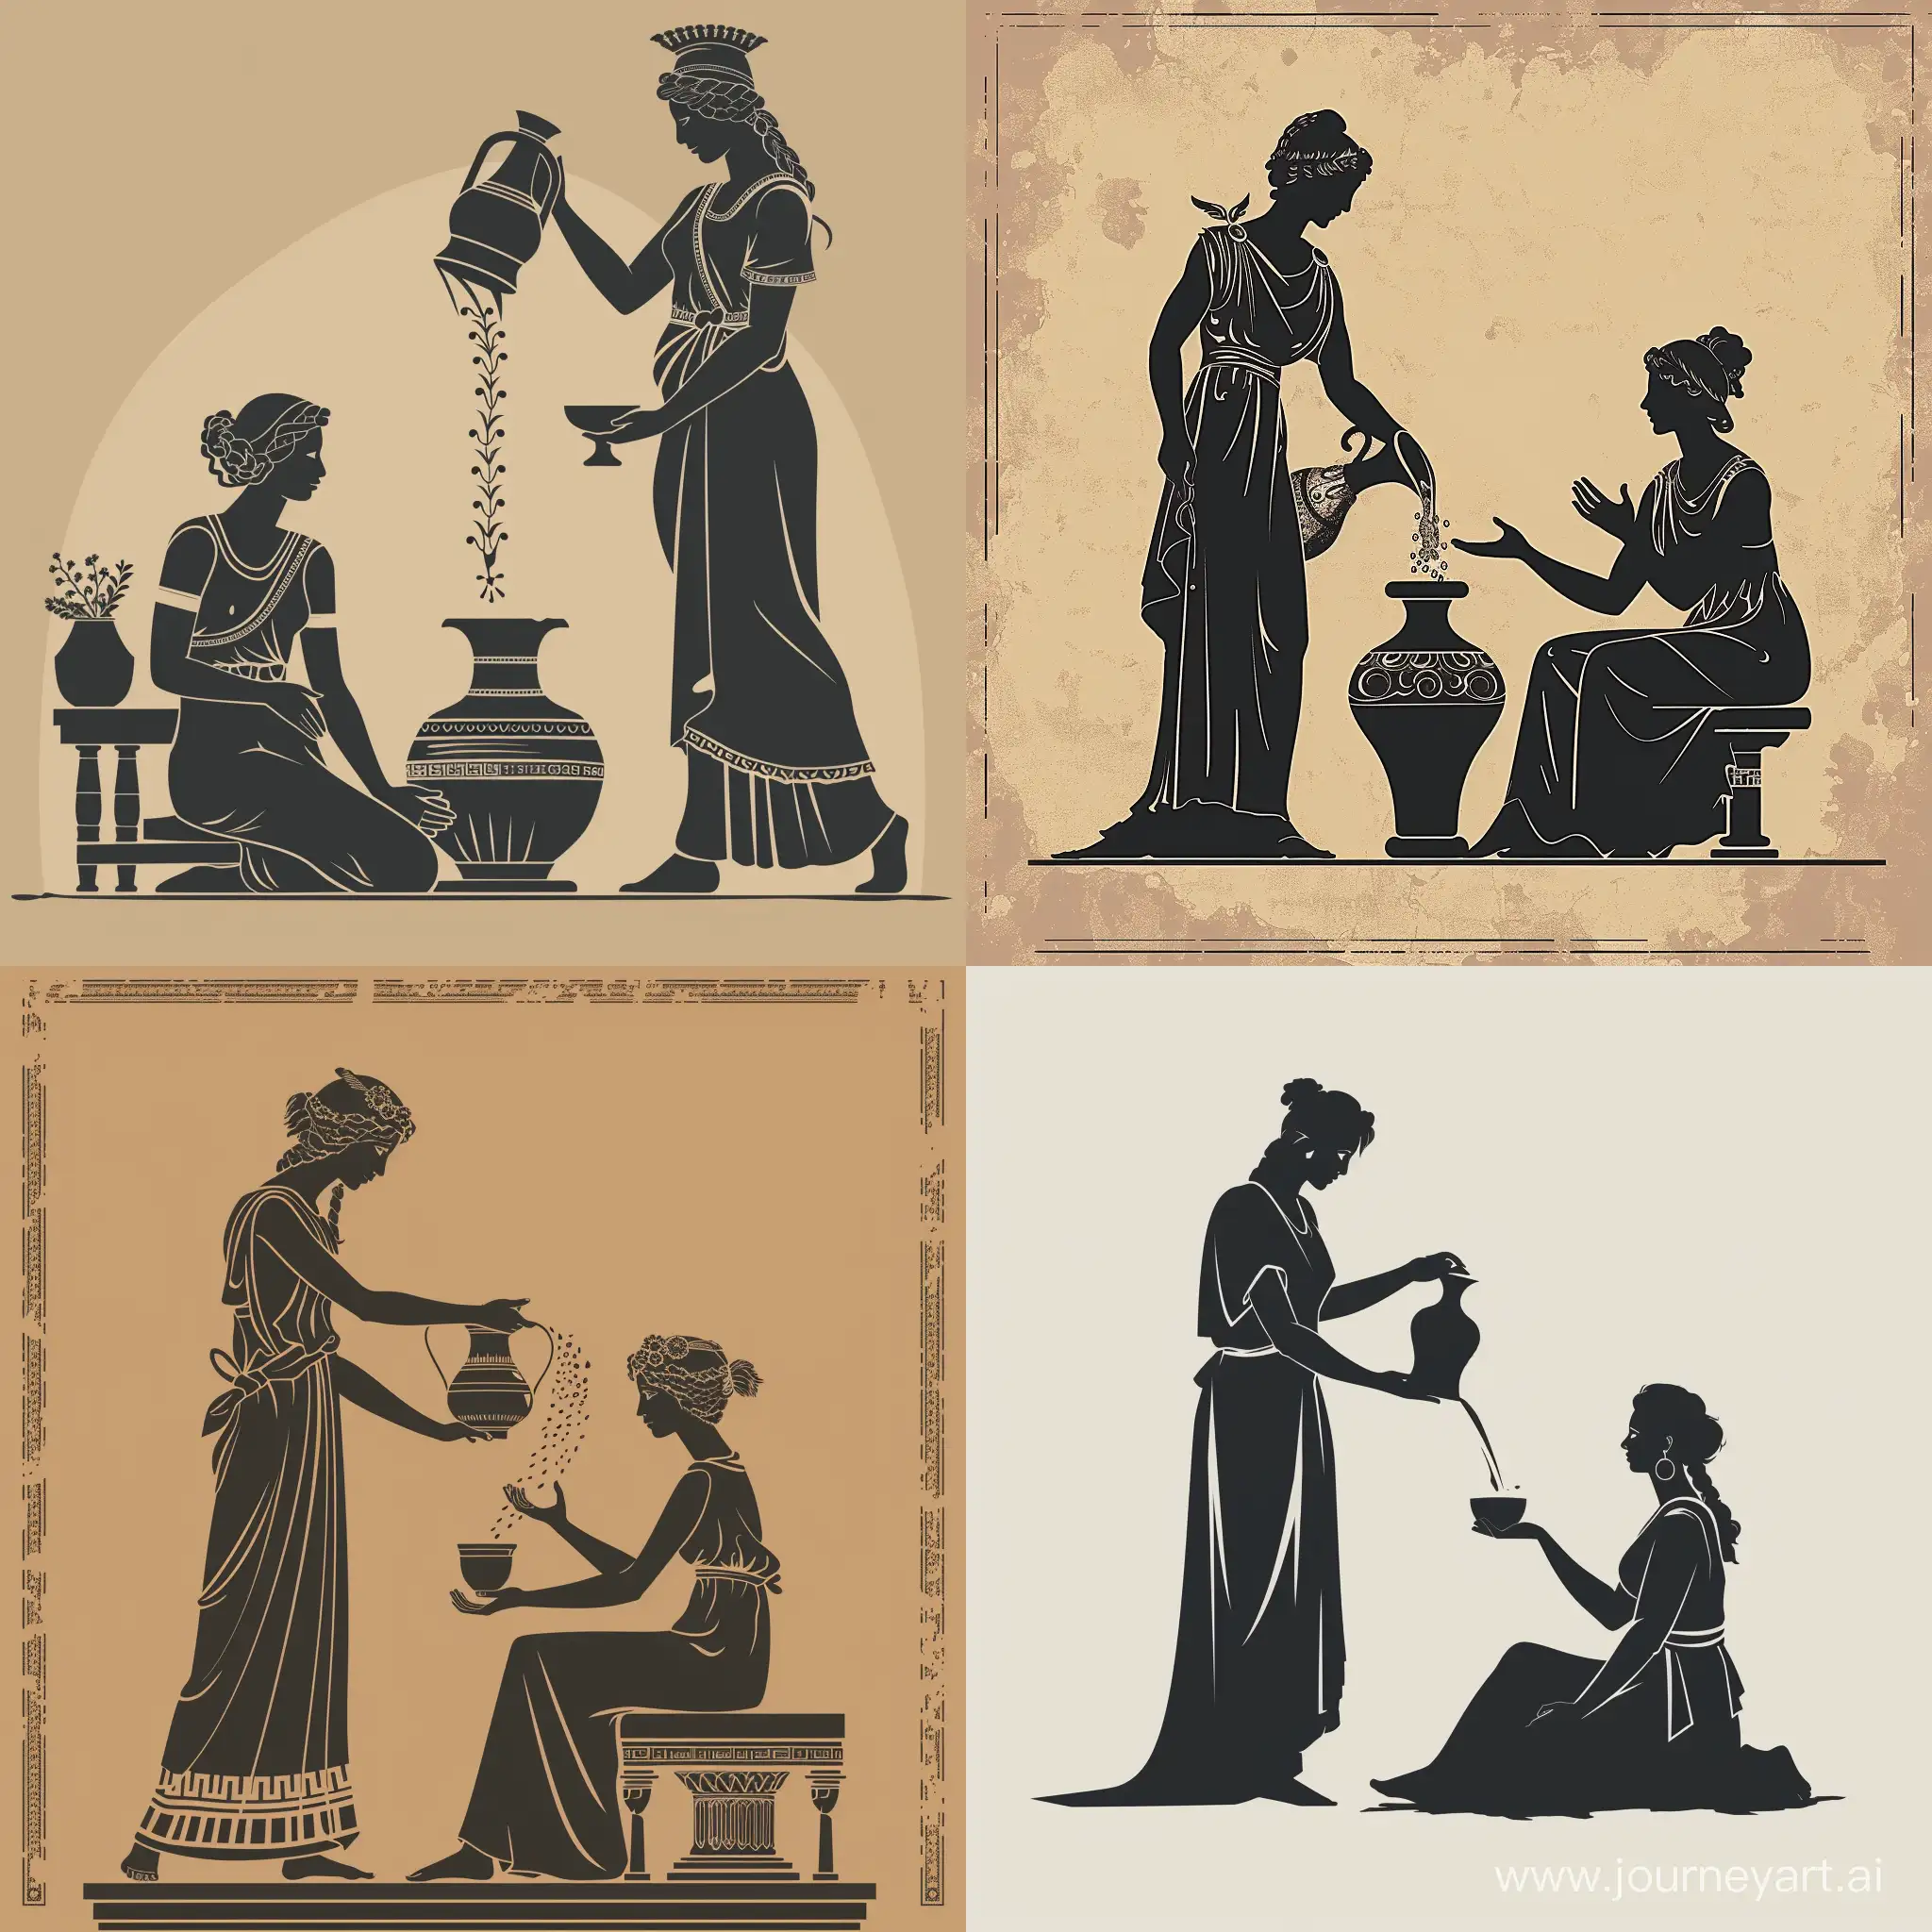 a 2d drawing of a standing woman pouring water from an amphora vase into the hands of another sitting woman. the design should be inspired by ancient greece